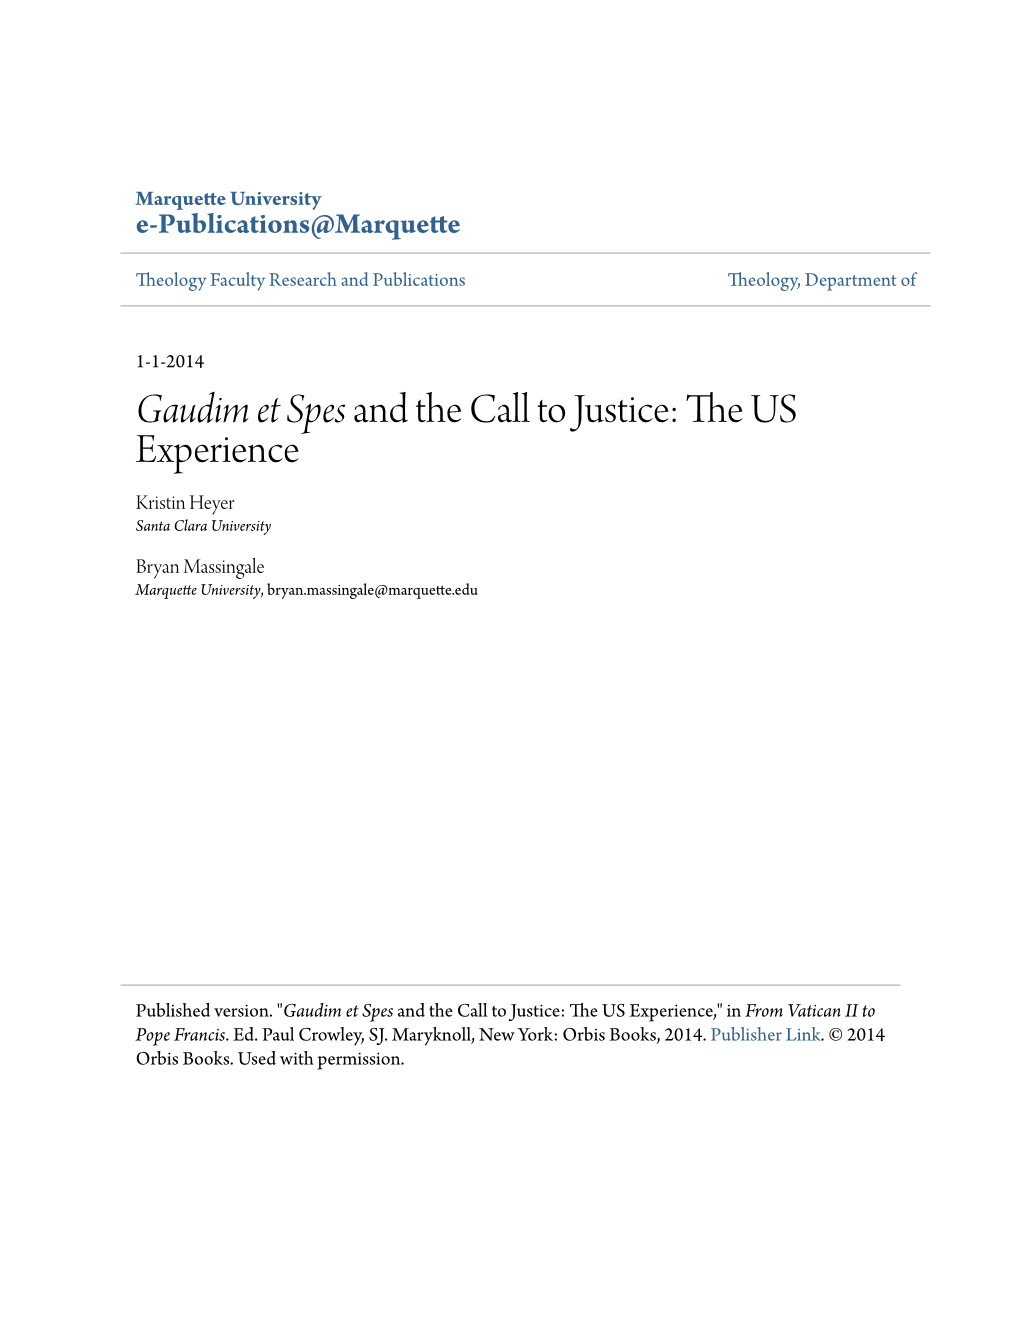 Gaudim Et Spes and the Call to Justice: the US Experience